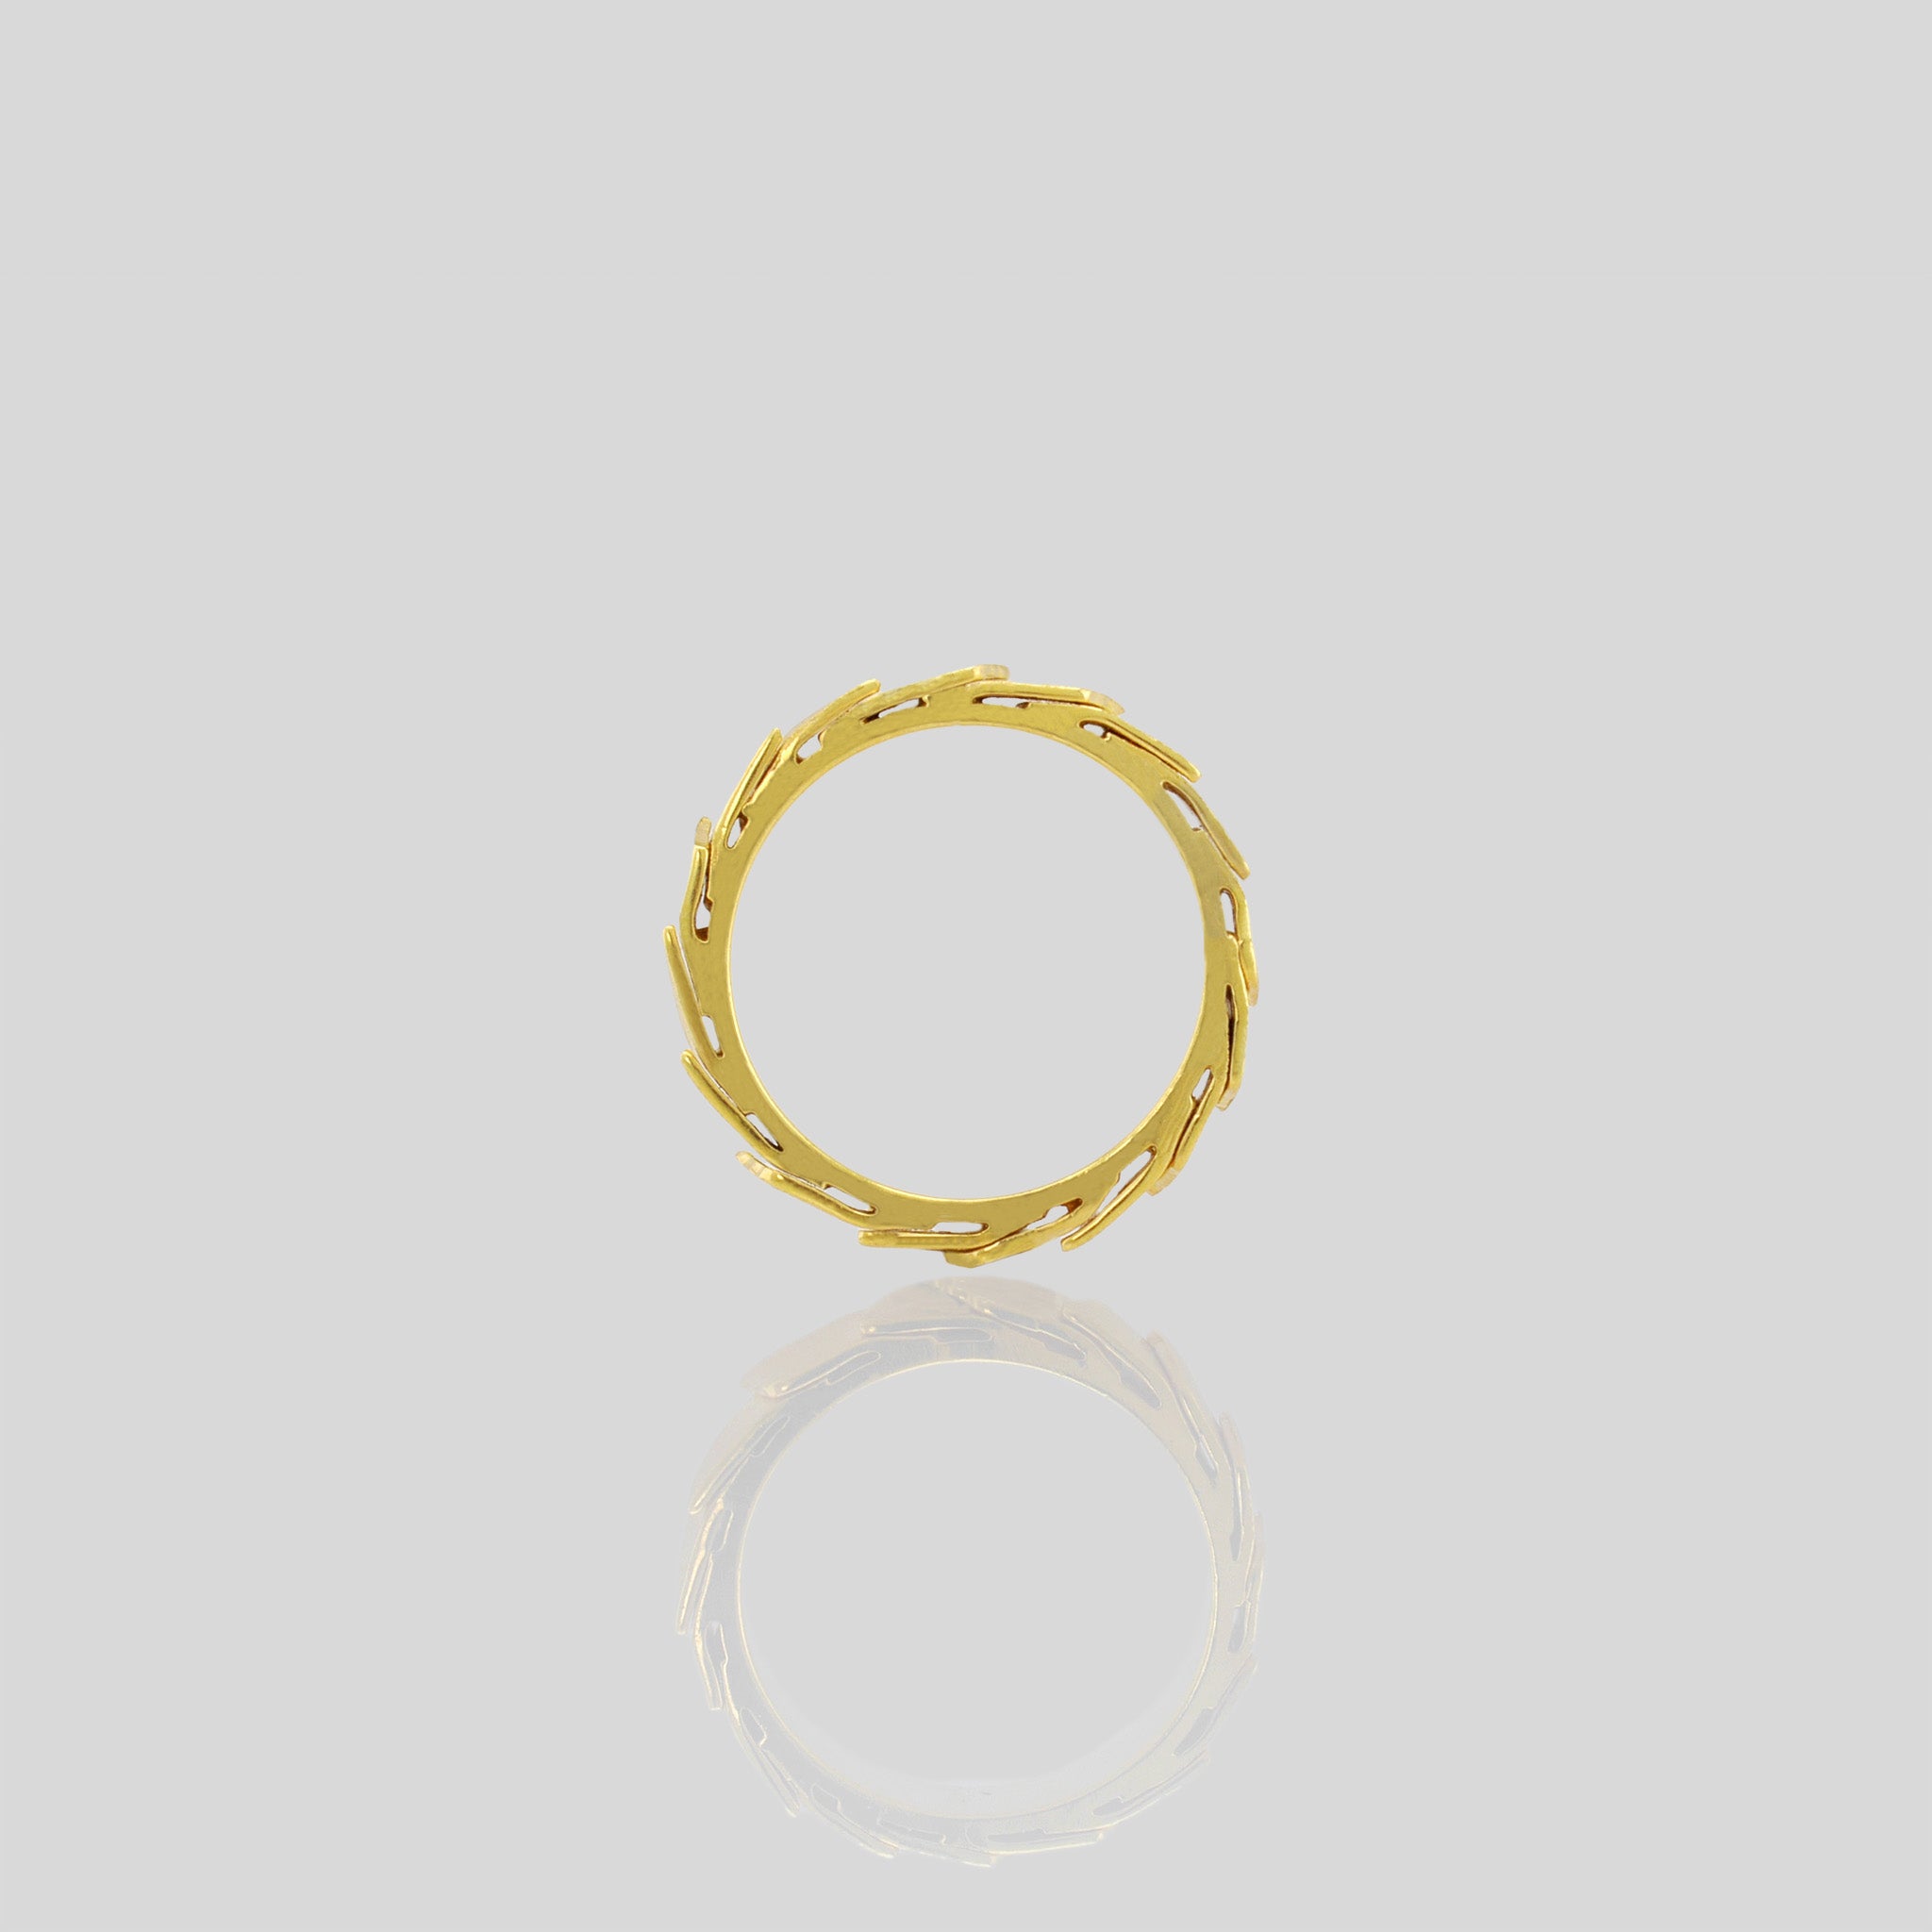 Side view of A captivating gold ring adorned with overlapping layers, evoking a sense of continuous motion and embrace. The inner surface is smooth, for optimal comfort.